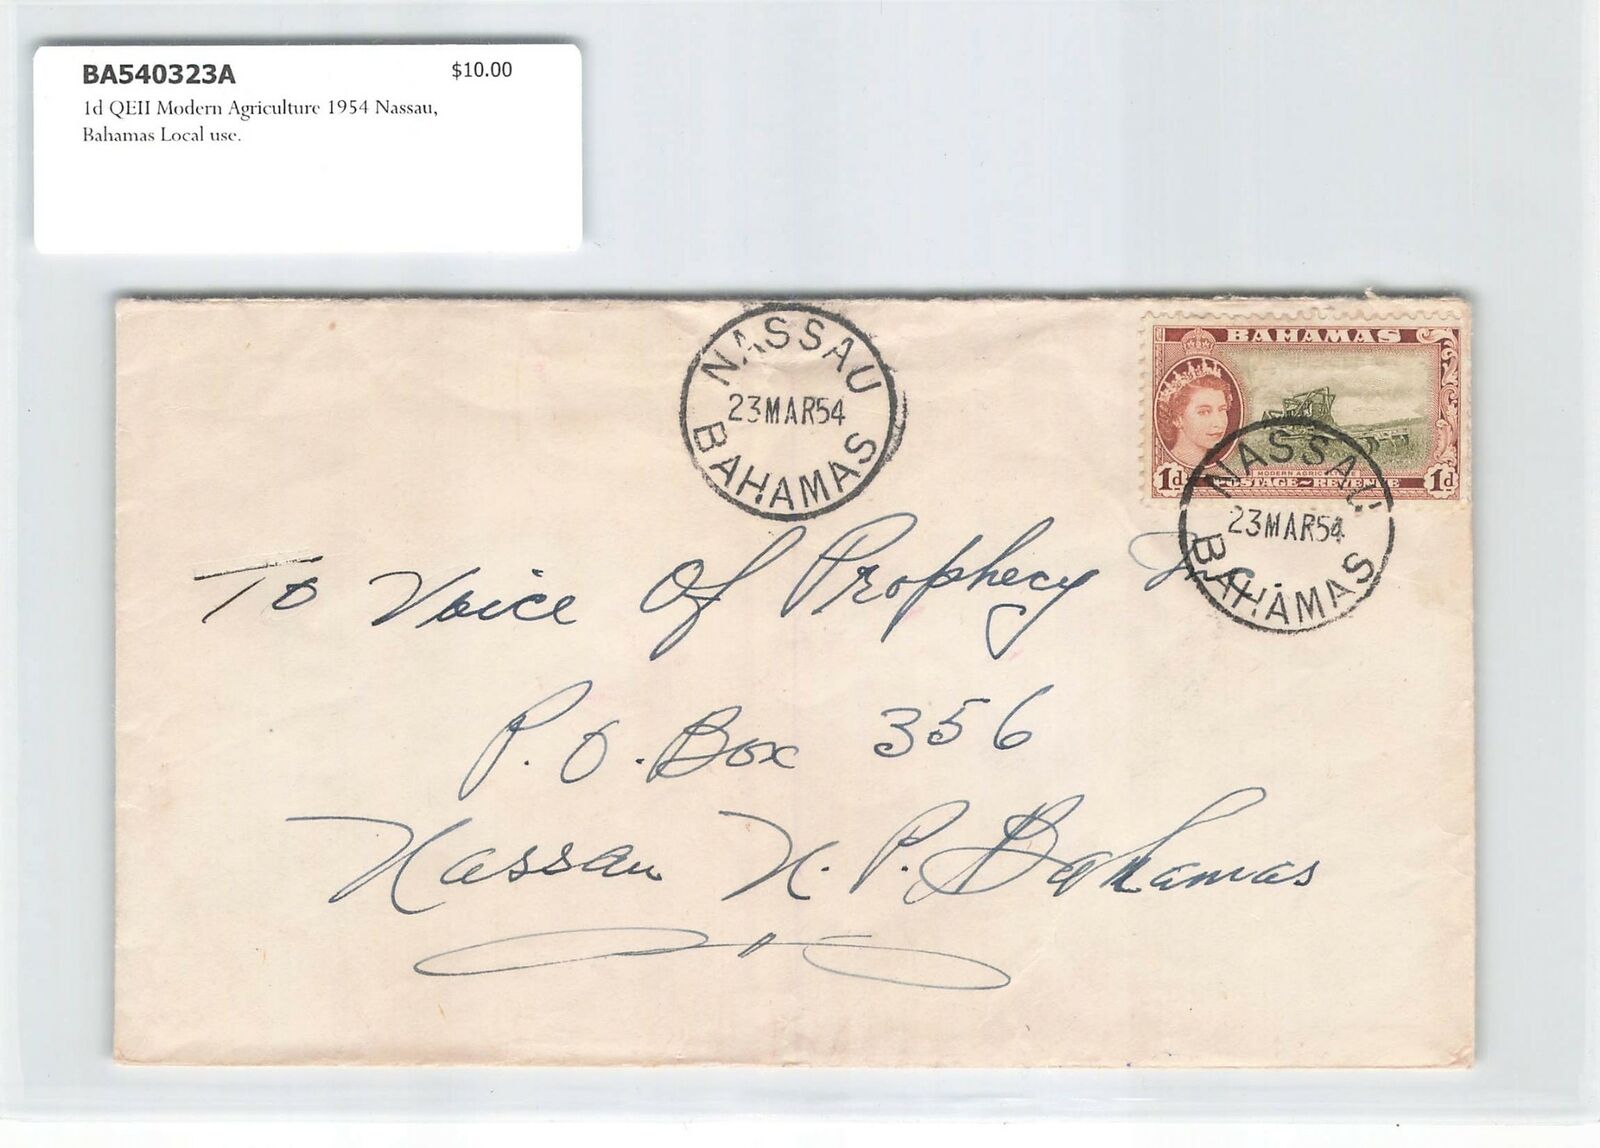 Bahamas 1954 1d Qeii Modern Agriculture On Locally Used Cover From Nassau